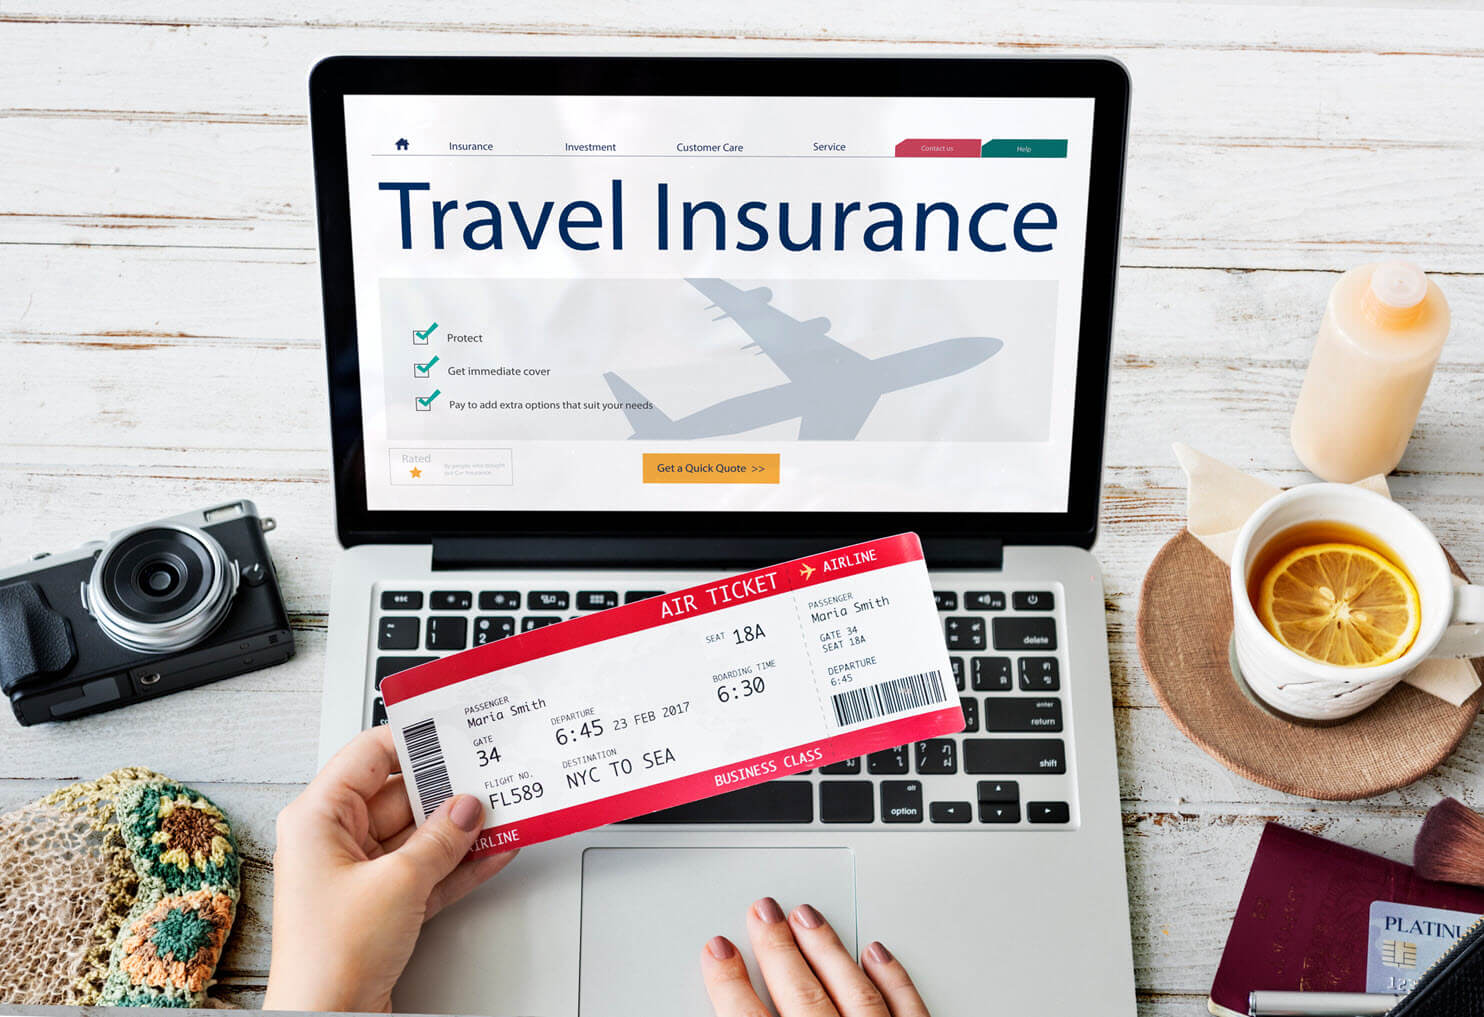 is travel insurance cancellable